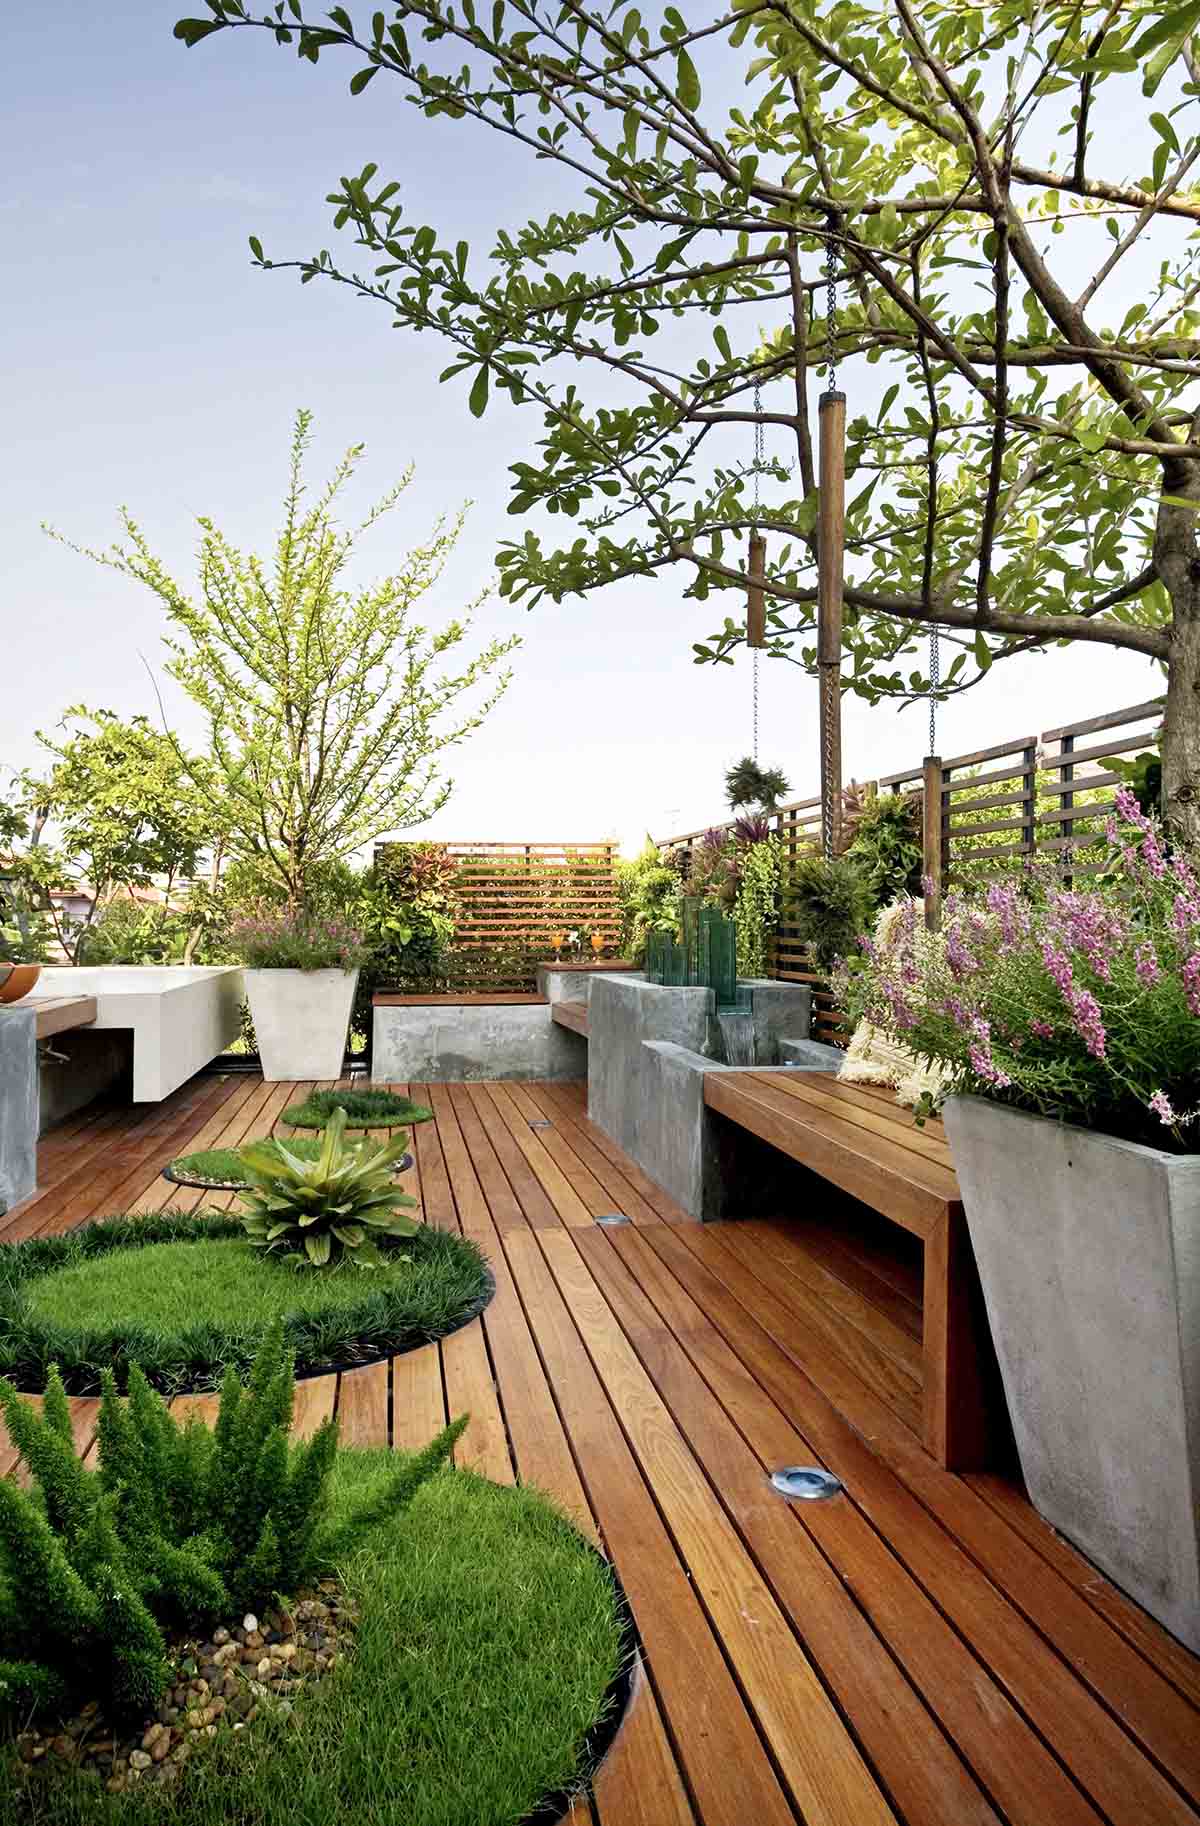 Concrete Planters and In-Set Grass Patches